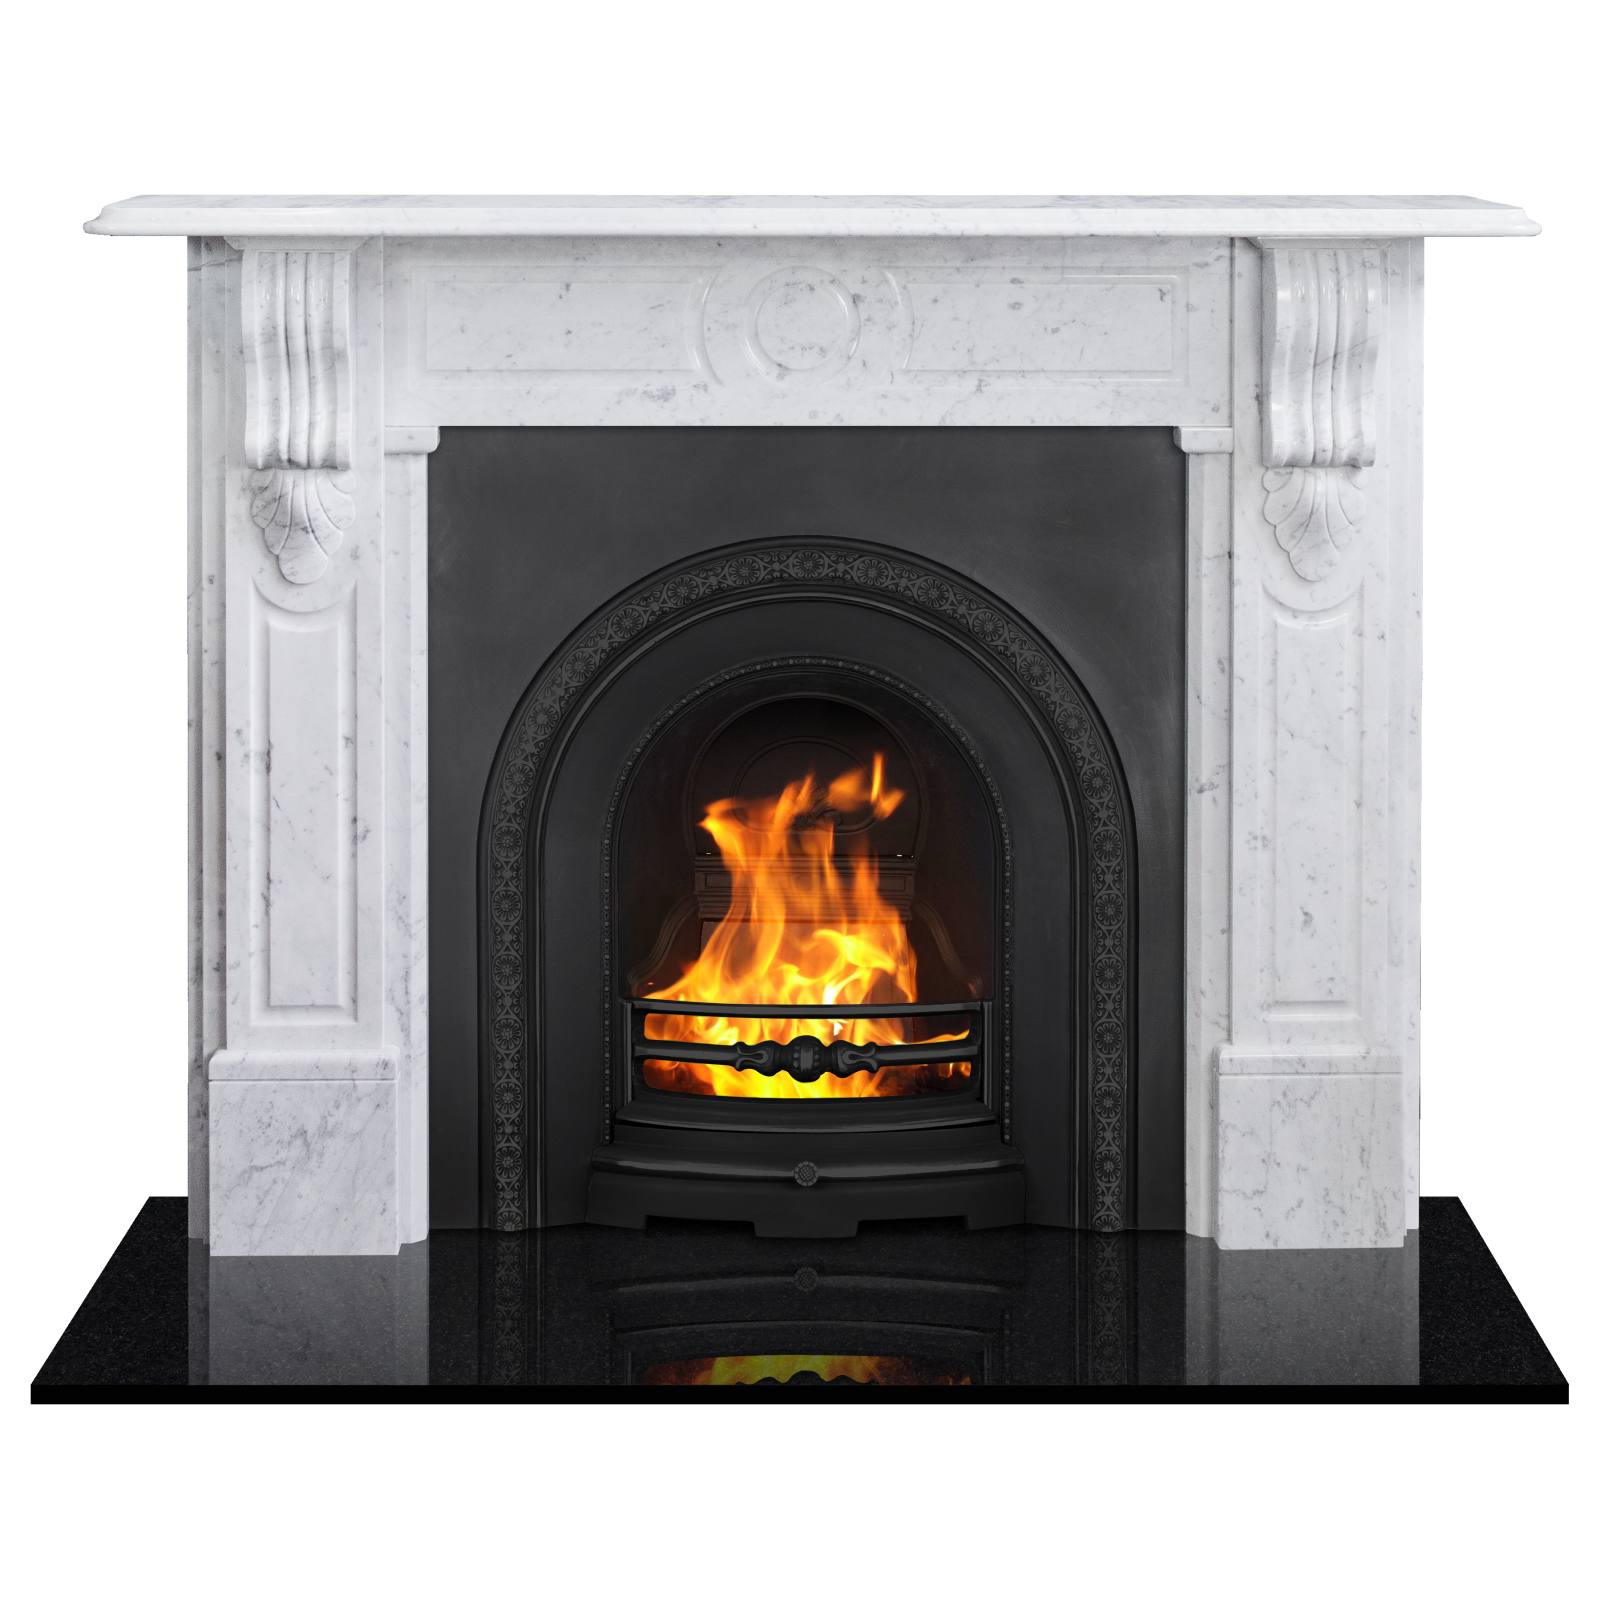 Melbourne Marble Mantel With Square, Stone Fireplace Mantel Melbourne